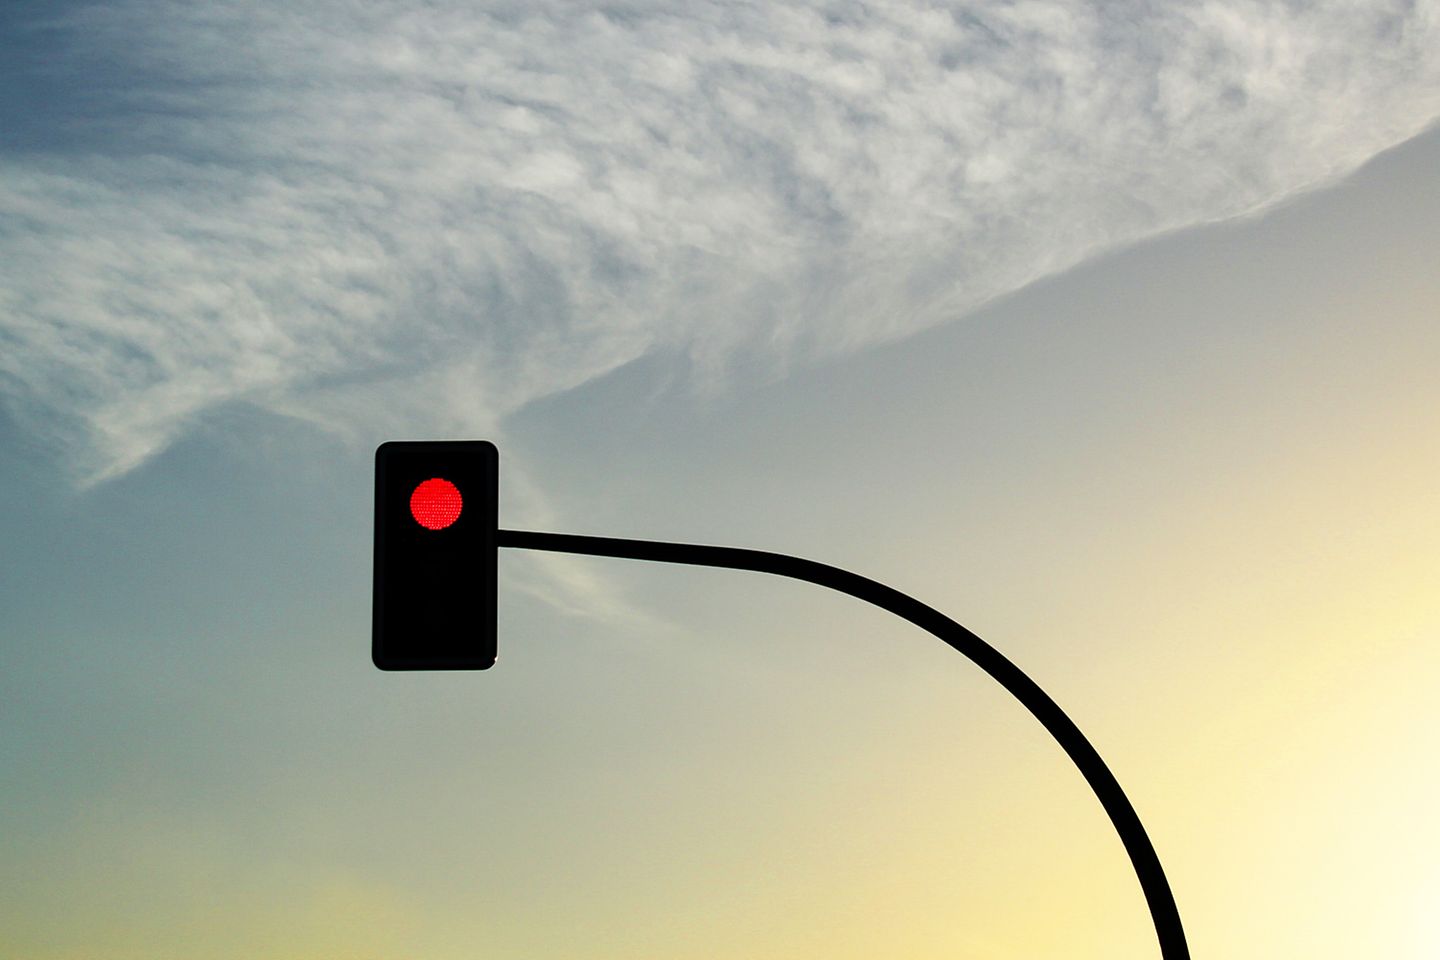 Picturesque shot of a cloud constellation at dusk, in front of it a red traffic light can be seen.